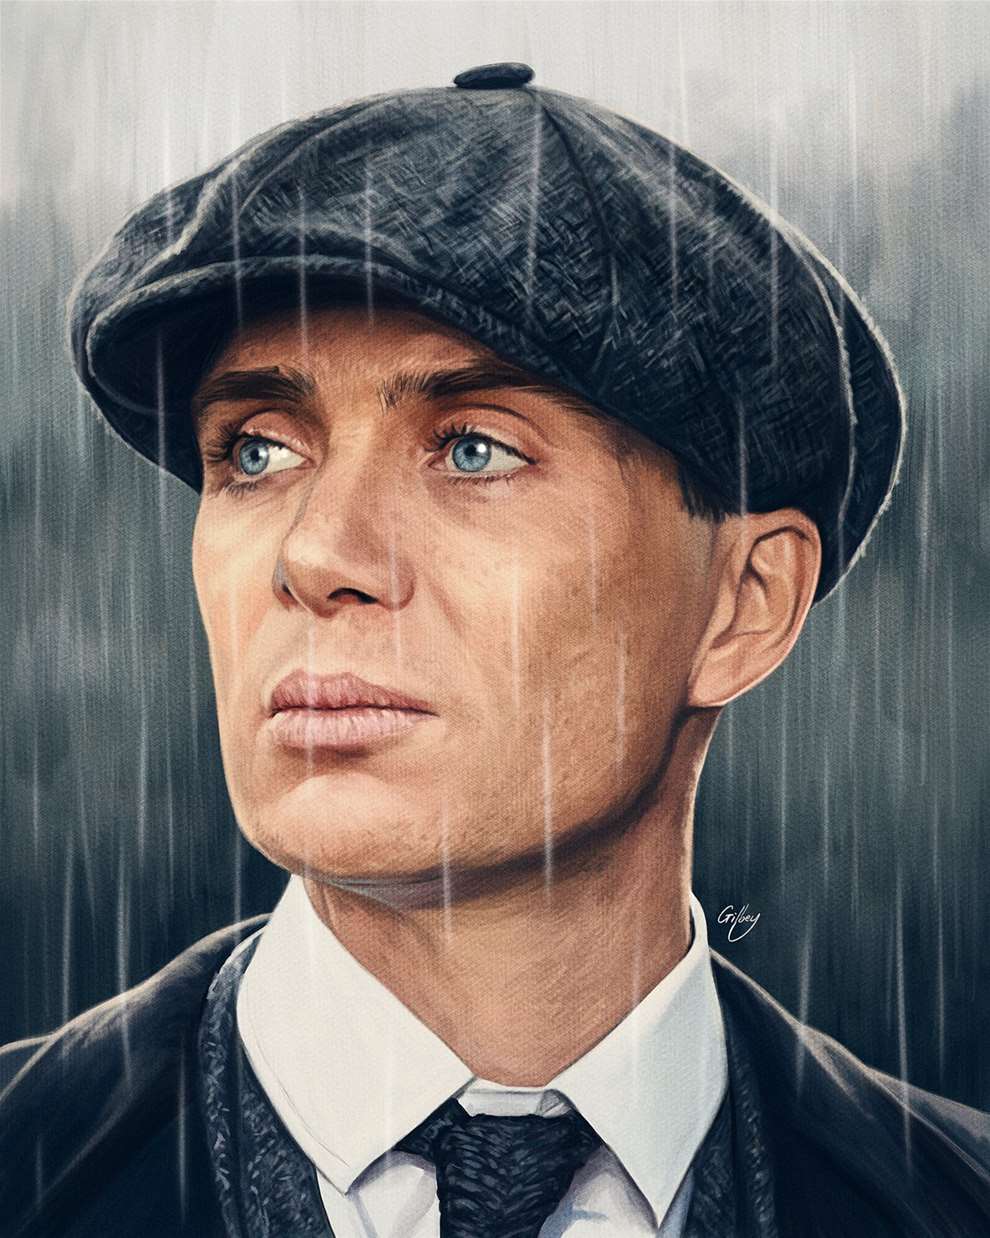 Sam  Gilbey, Painterly digital portrait of Cillian Murphy as Tommy Shelby from Peaky Blinders for Domestic. 	